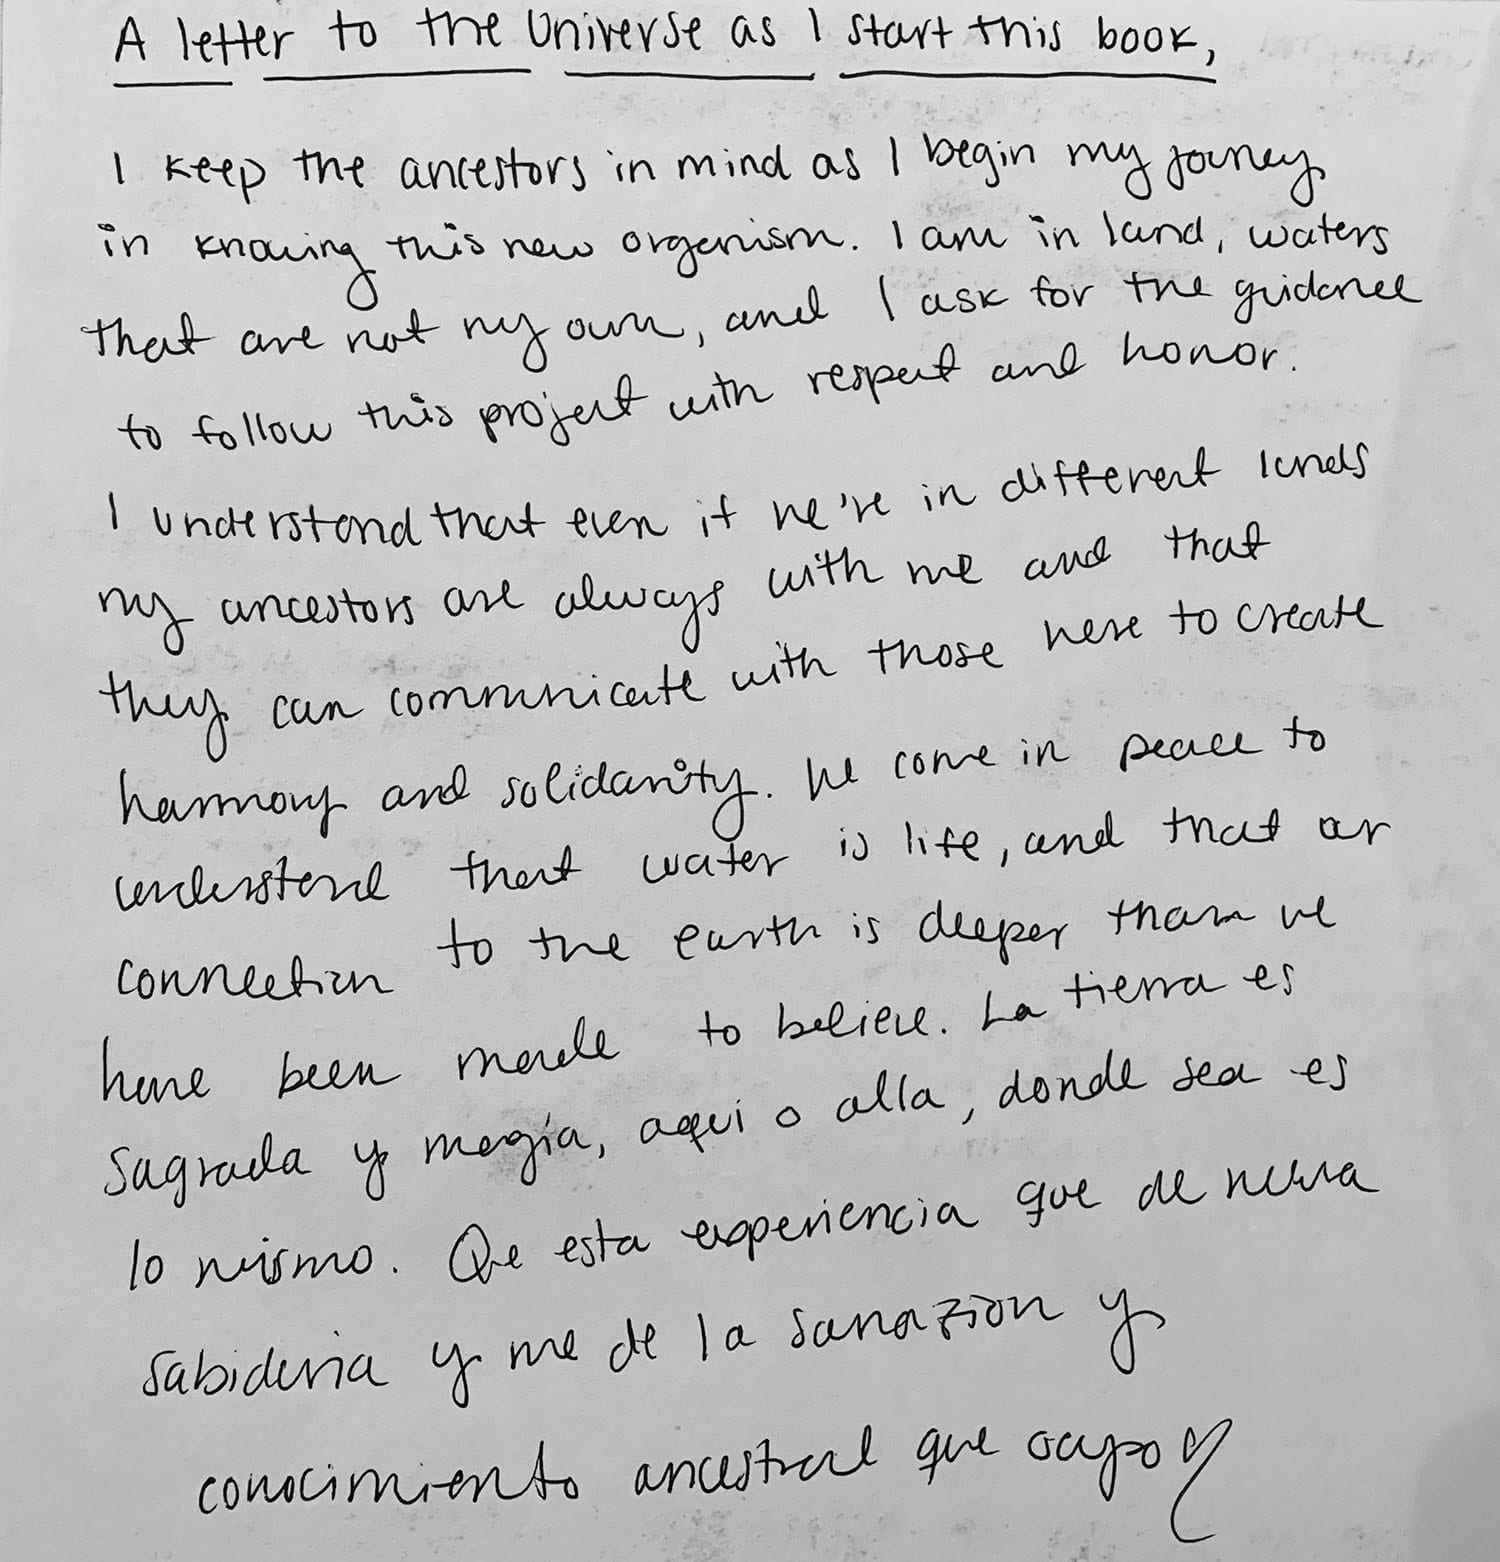 handwritten letter titled "A letter to the universe as I start this book"